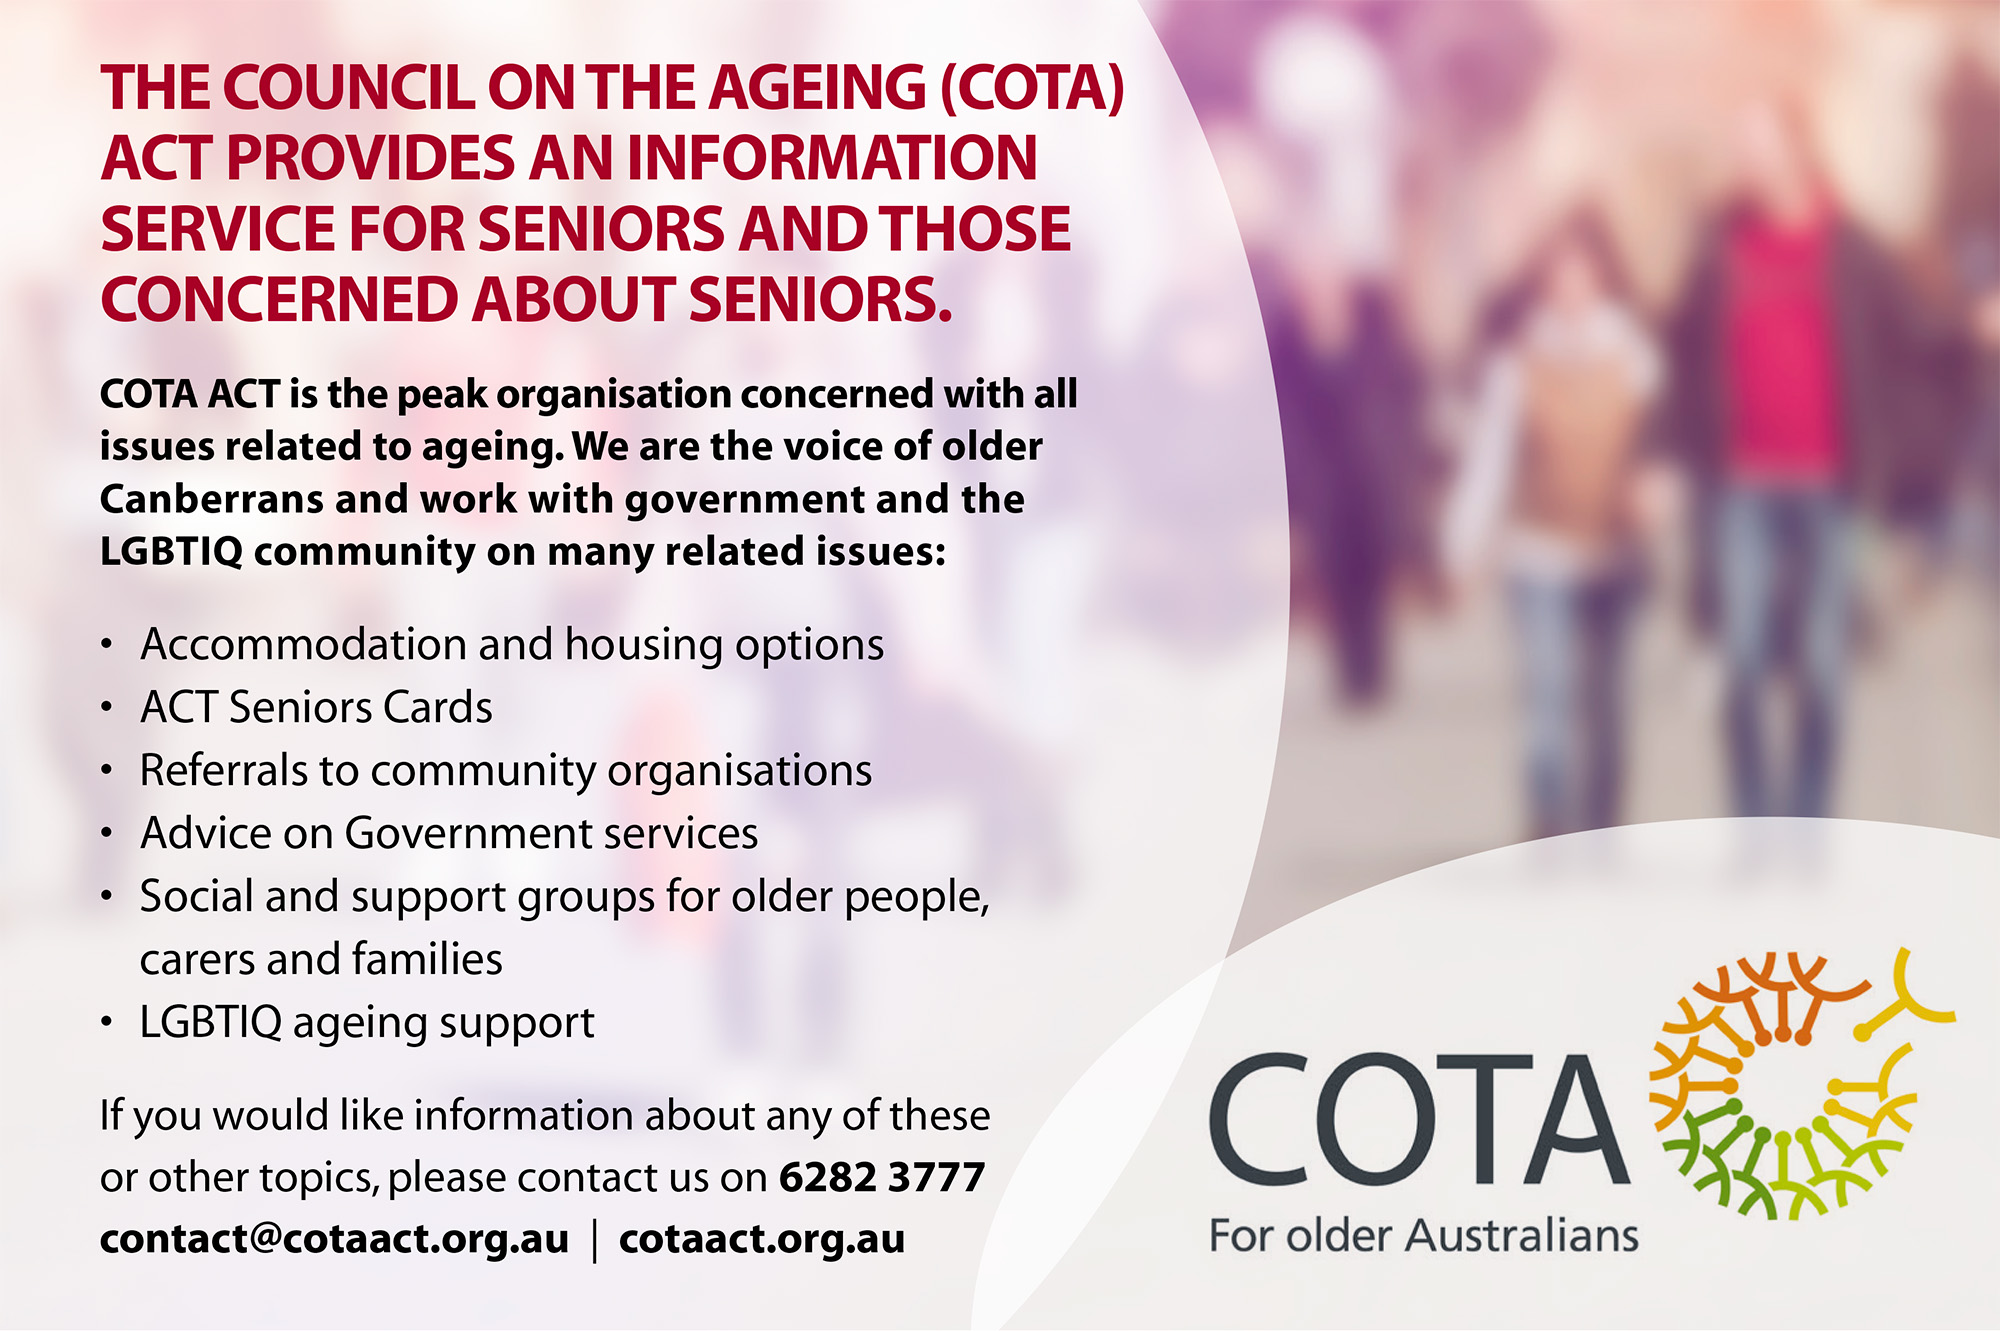 Council on the Ageing COTA ACT